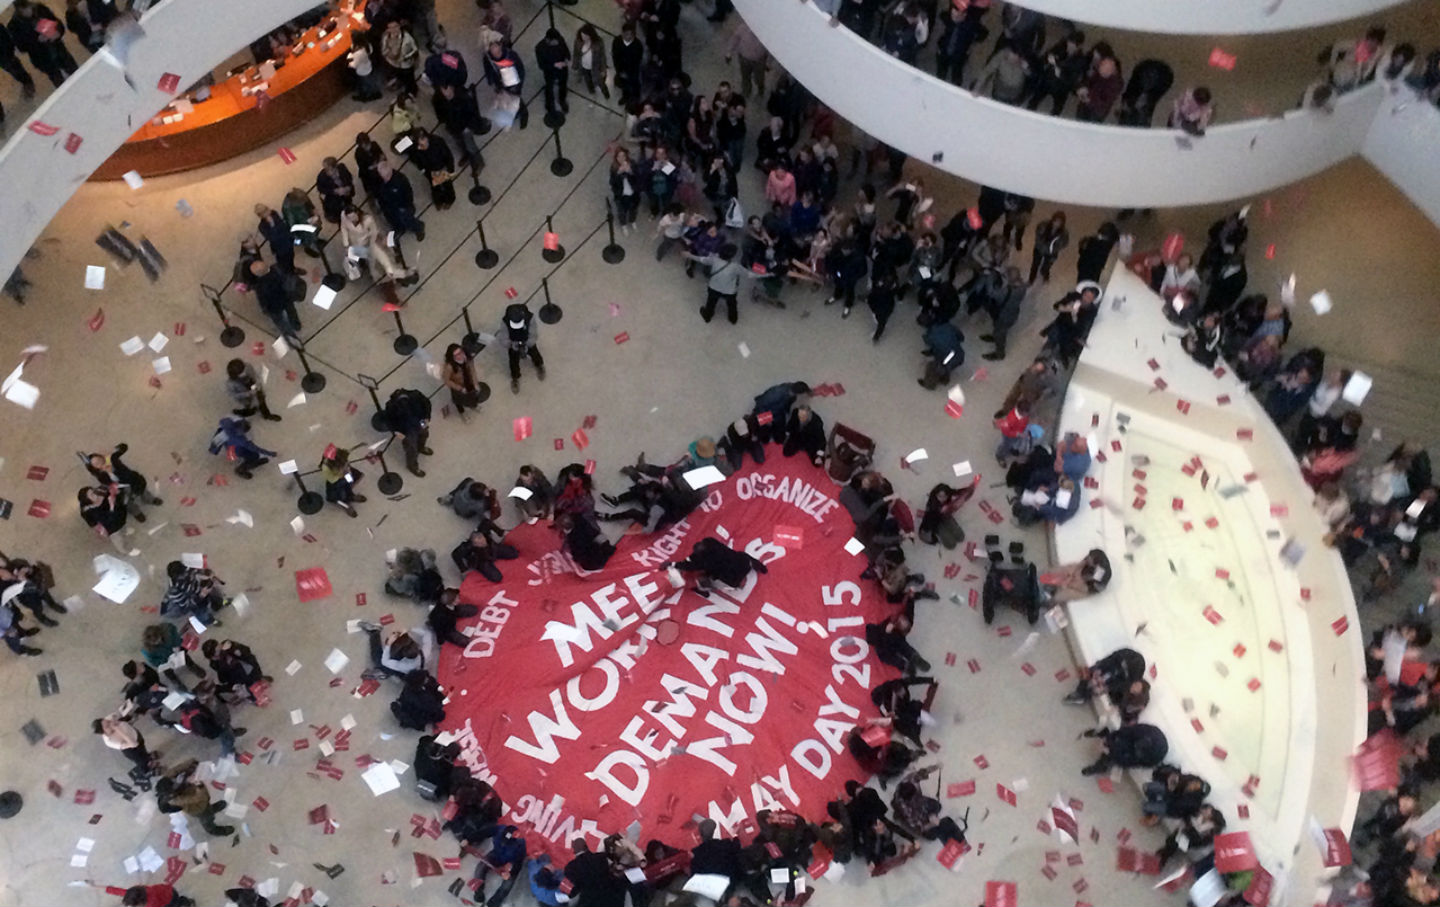 Why Did These Activists Shut Down the Guggenheim?